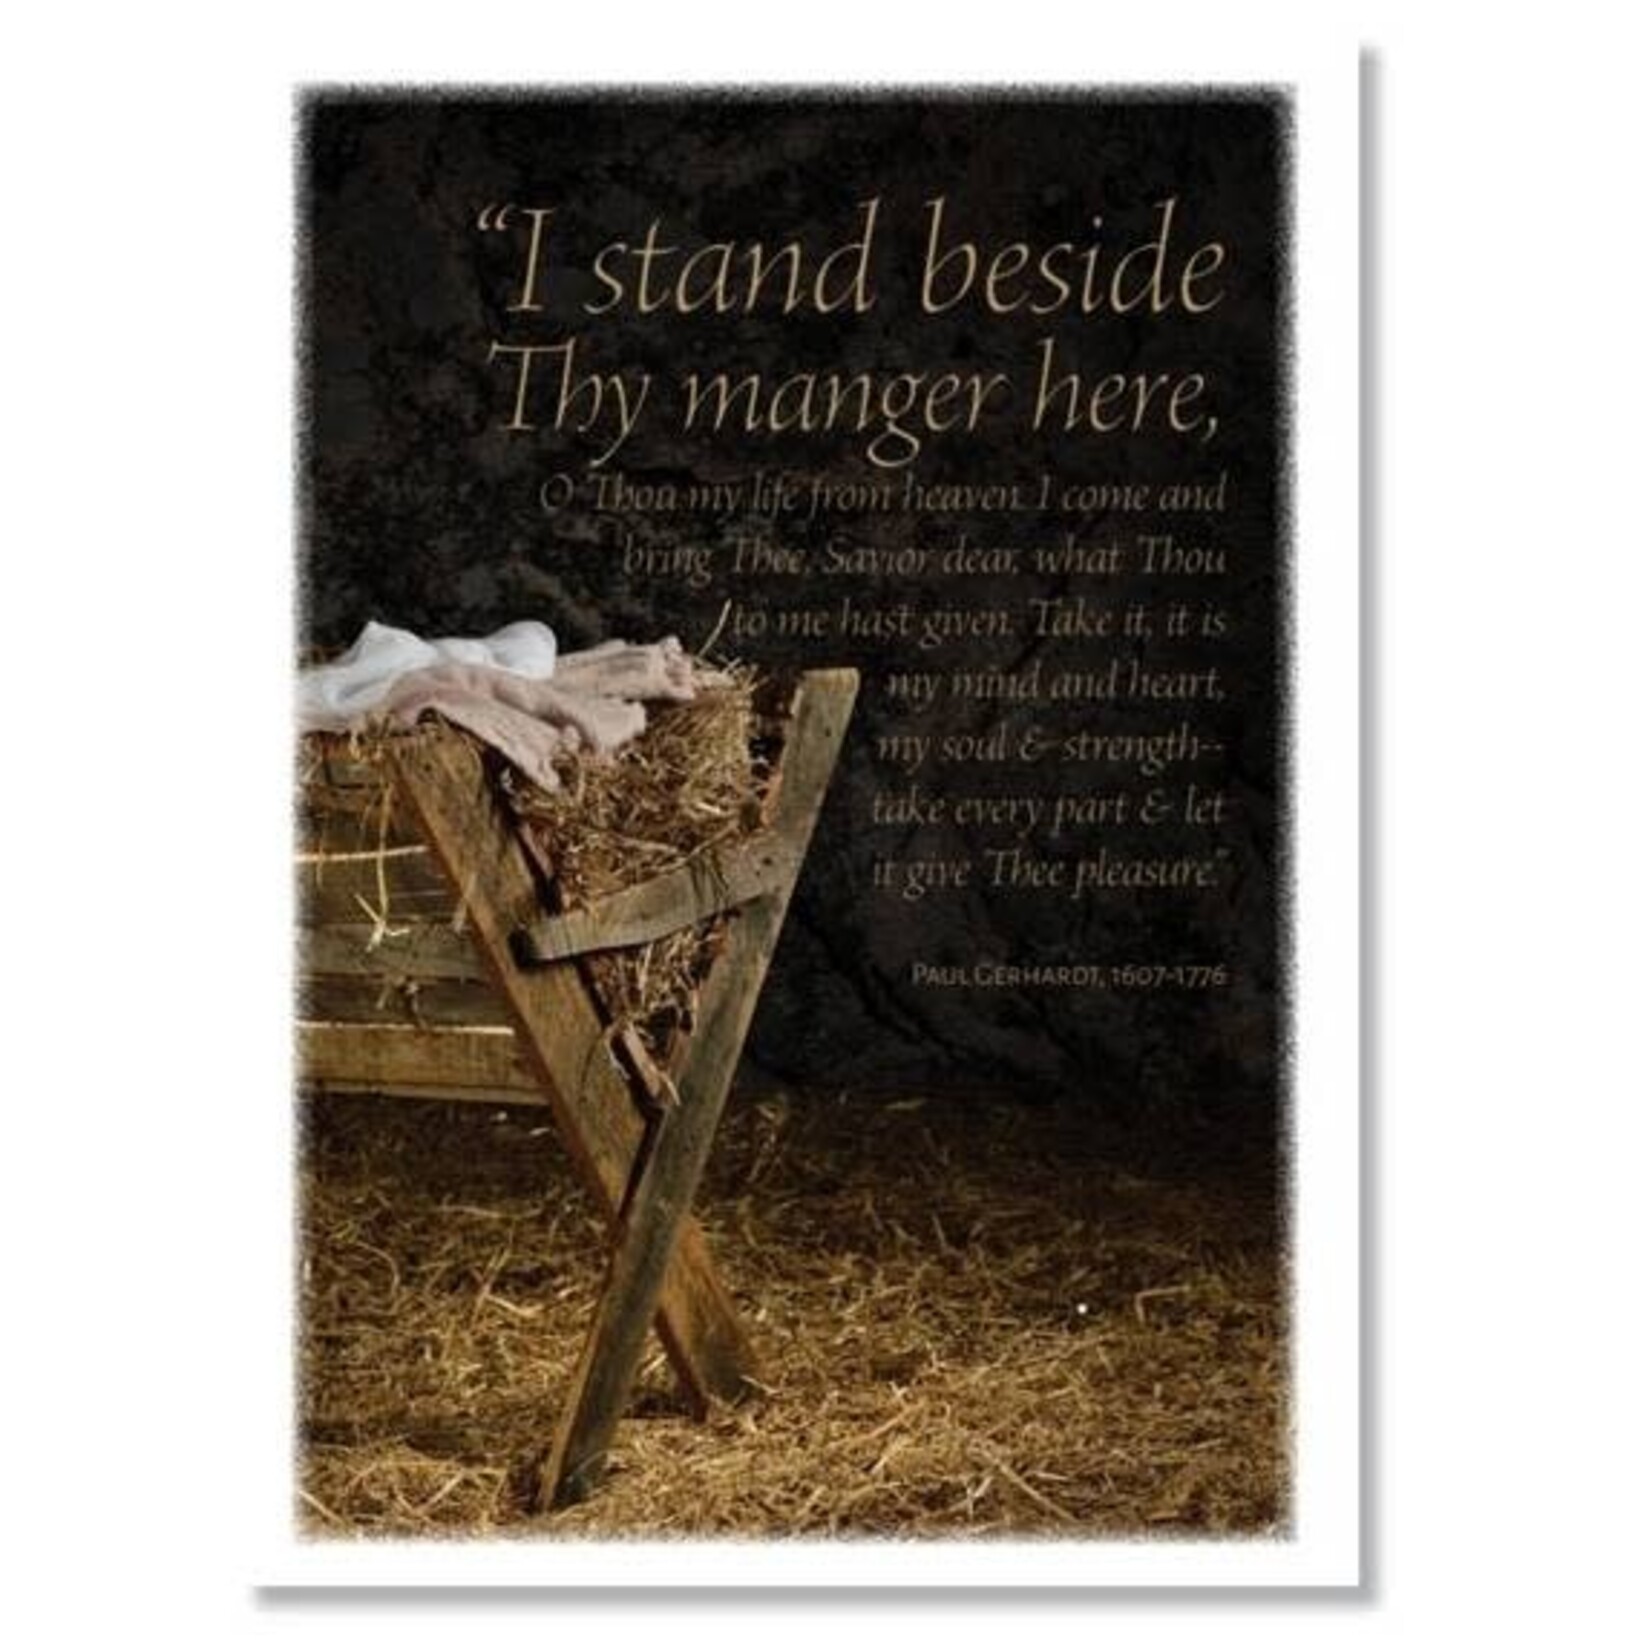 Hymns In My Heart - 5x7" Greeting Card - Christmas - I Stand Beside Thy Manger Here